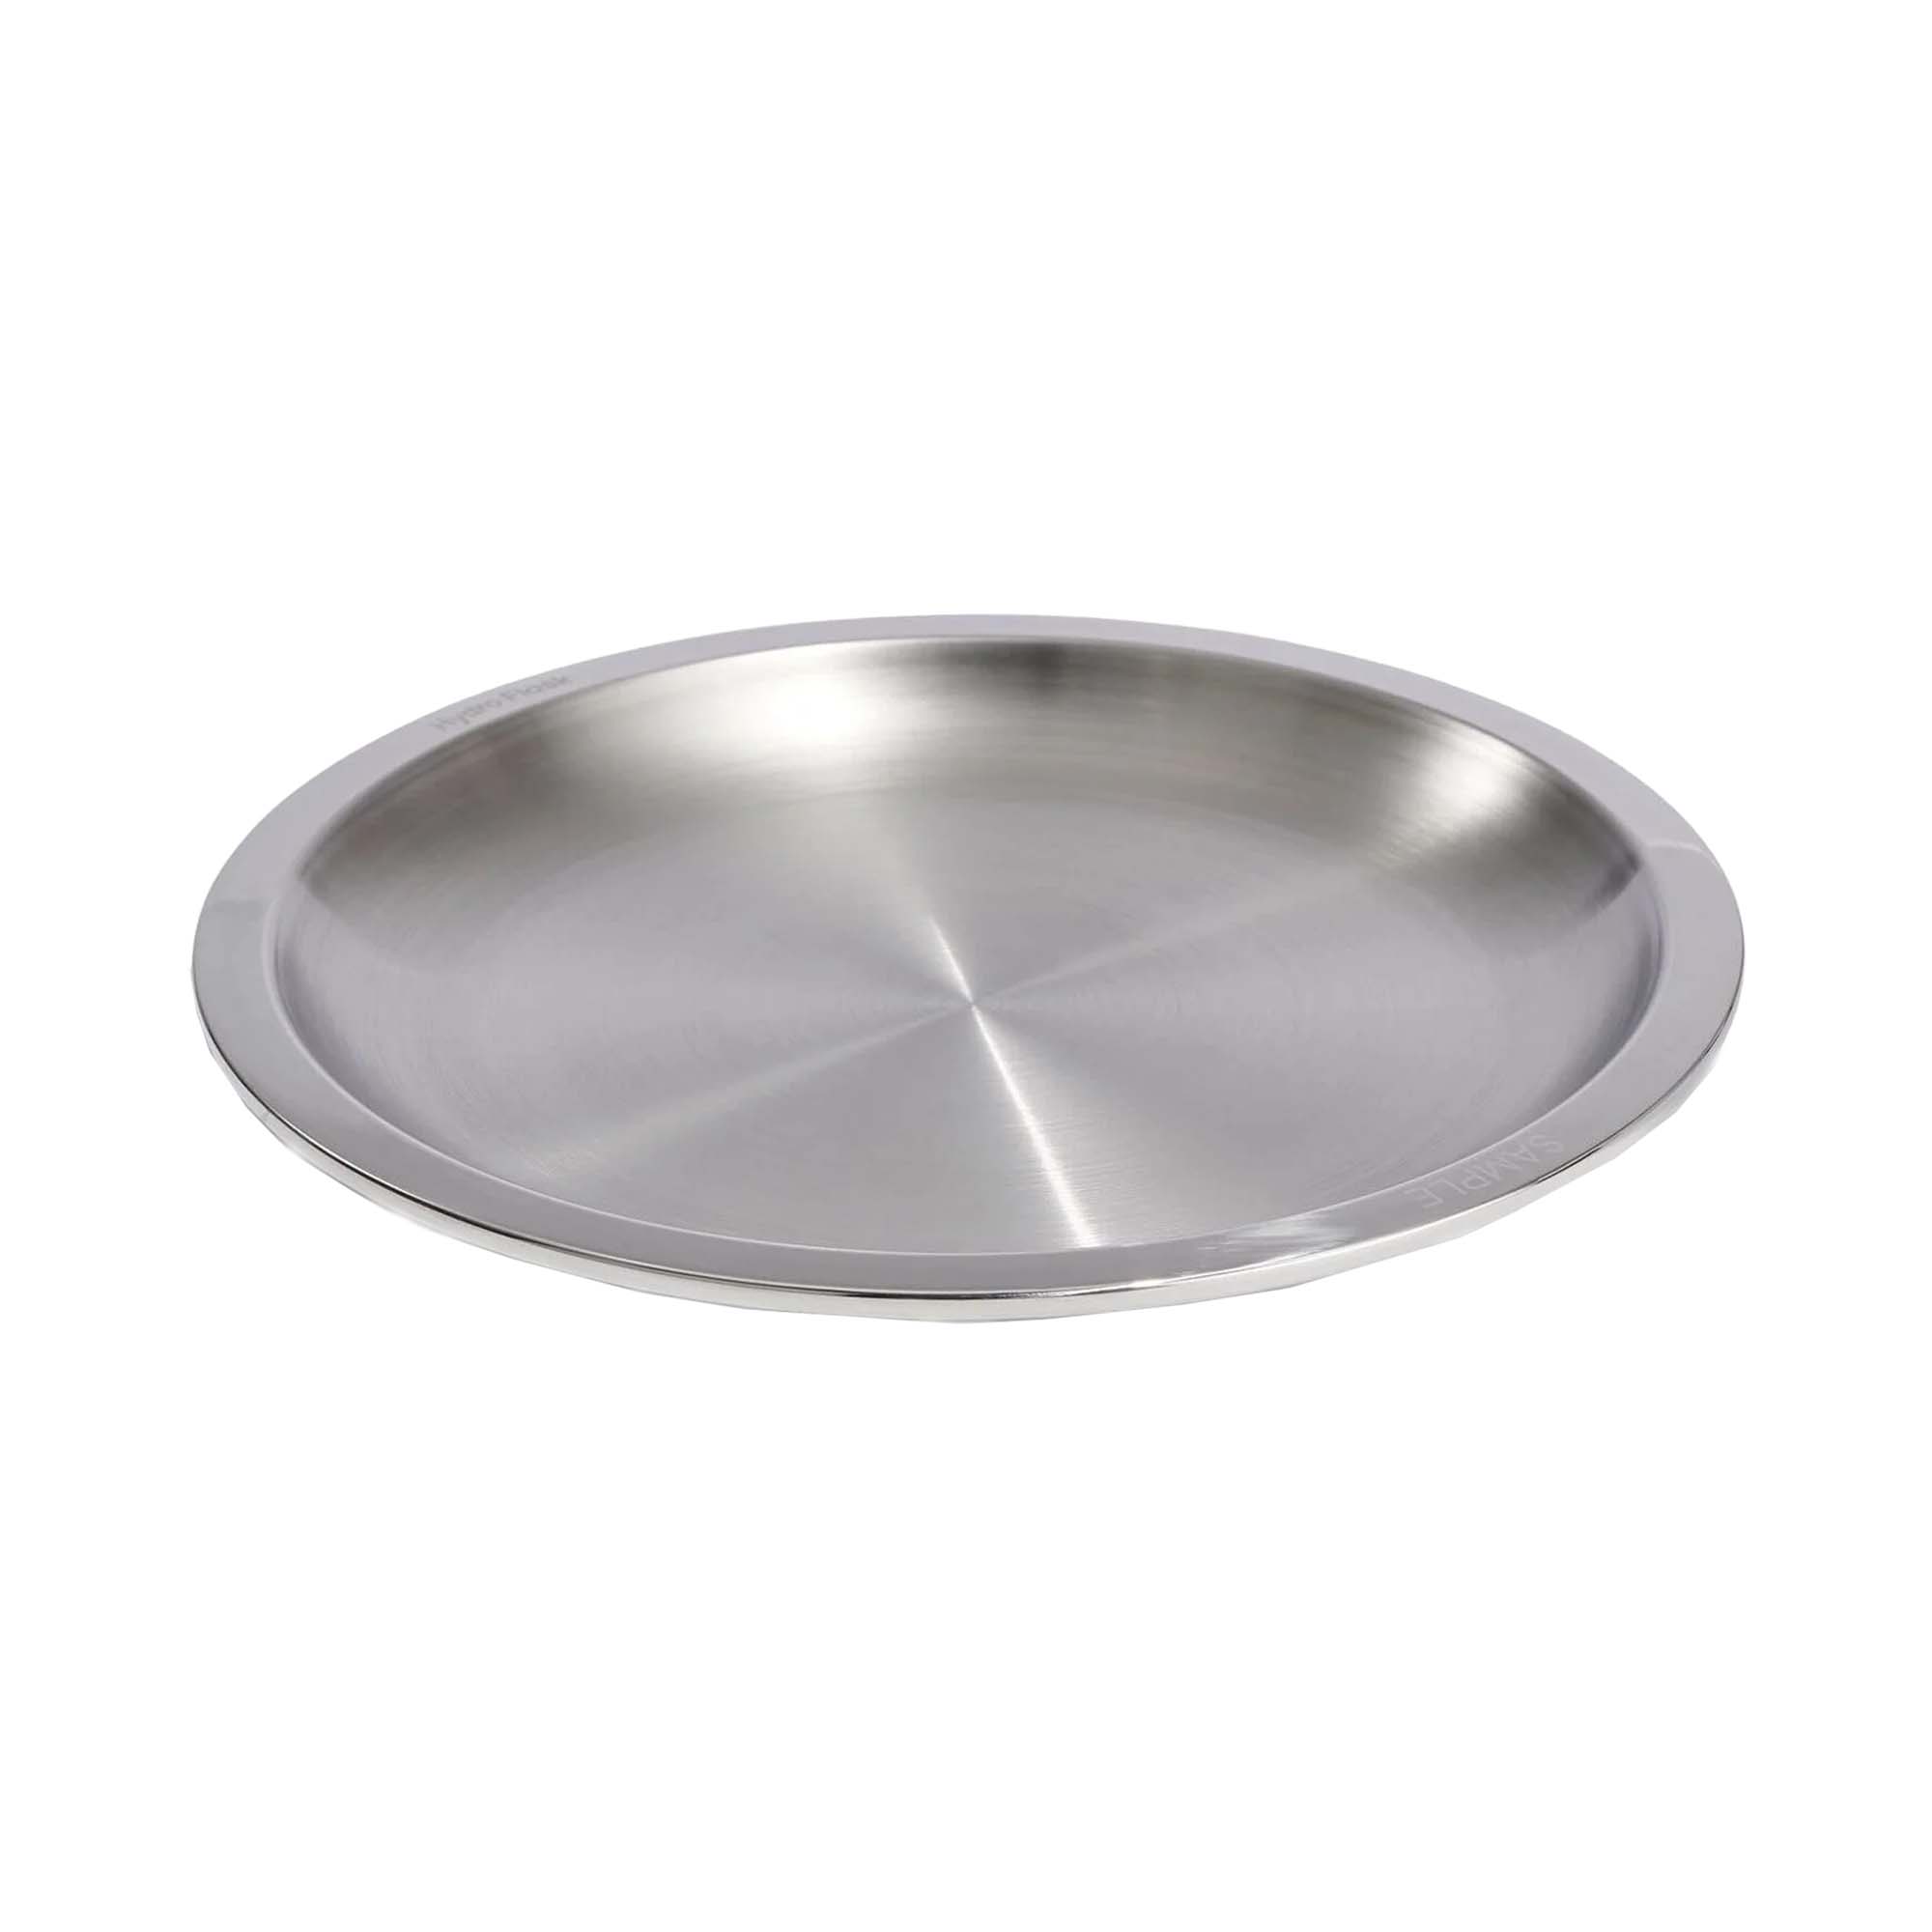 Photos - Other Camping Utensils Hydro Flask Camp Plate Stainless Steel Tableware, O/S Birch CWP035 